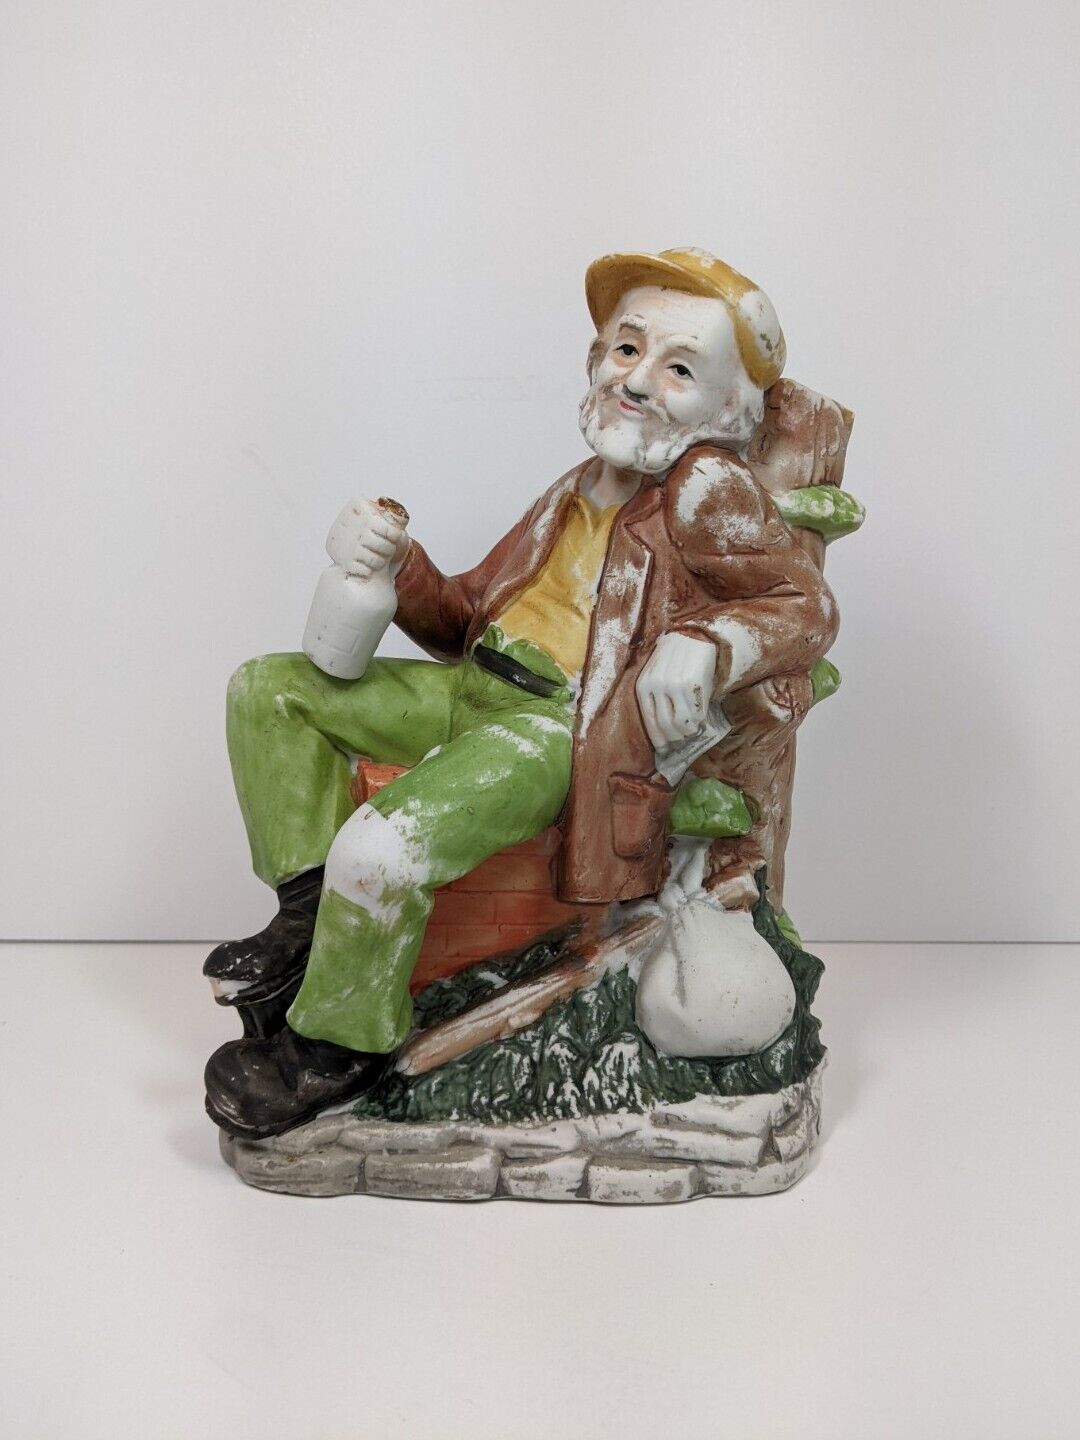 The Tired Old Man Vintage Ceramic Figurine / Statuette - Collector\'s Item  